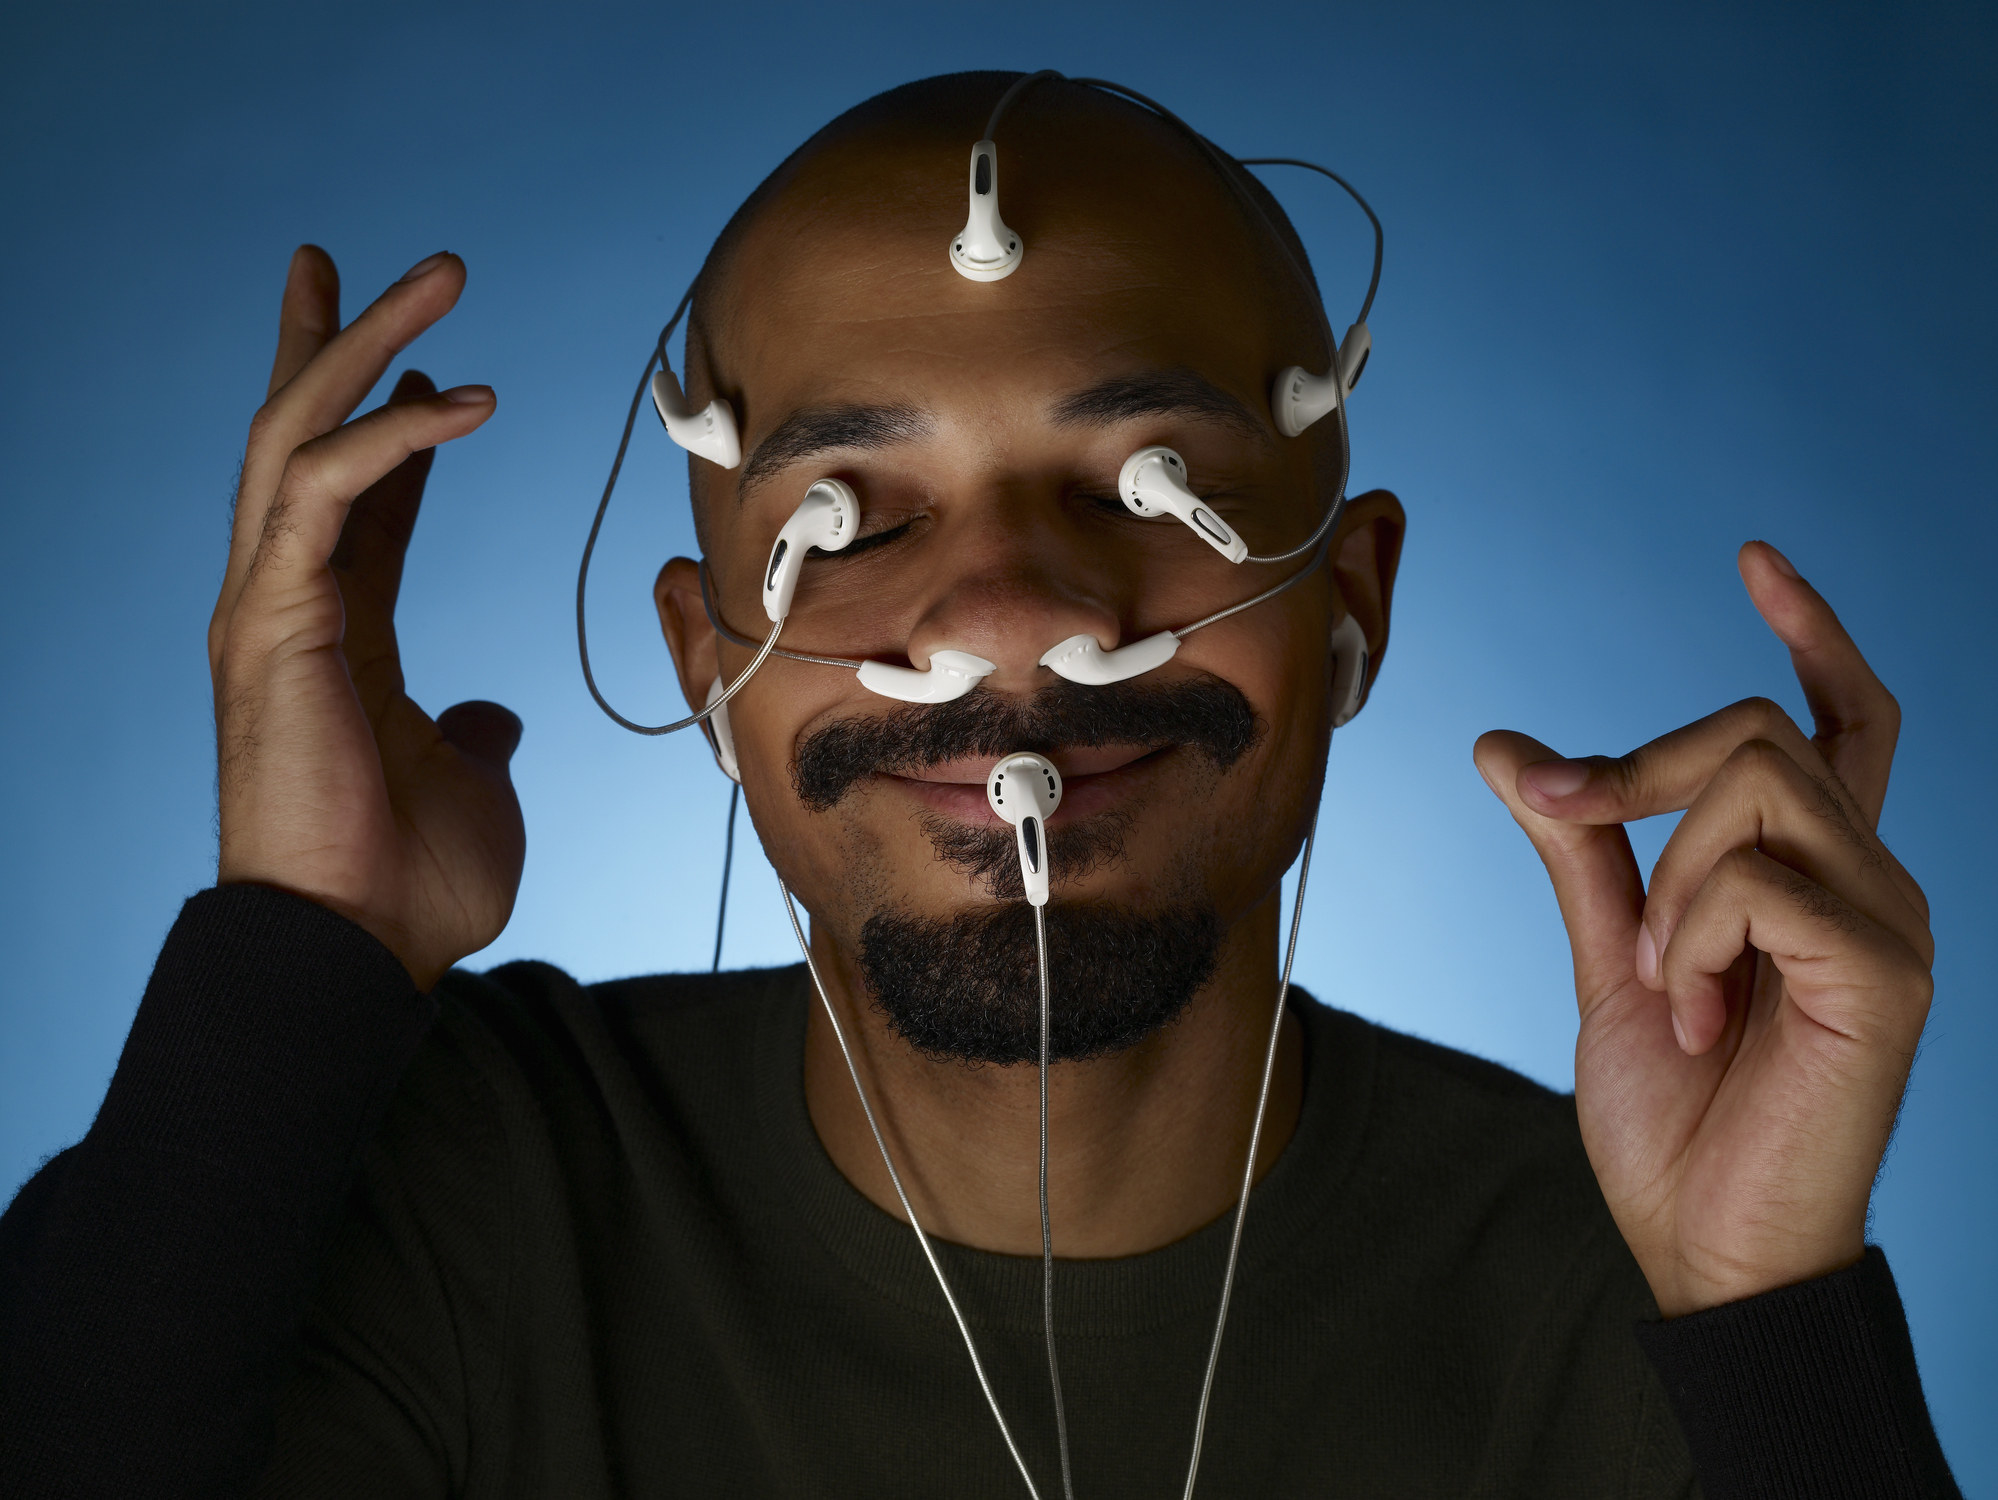 man with headphones all over his face